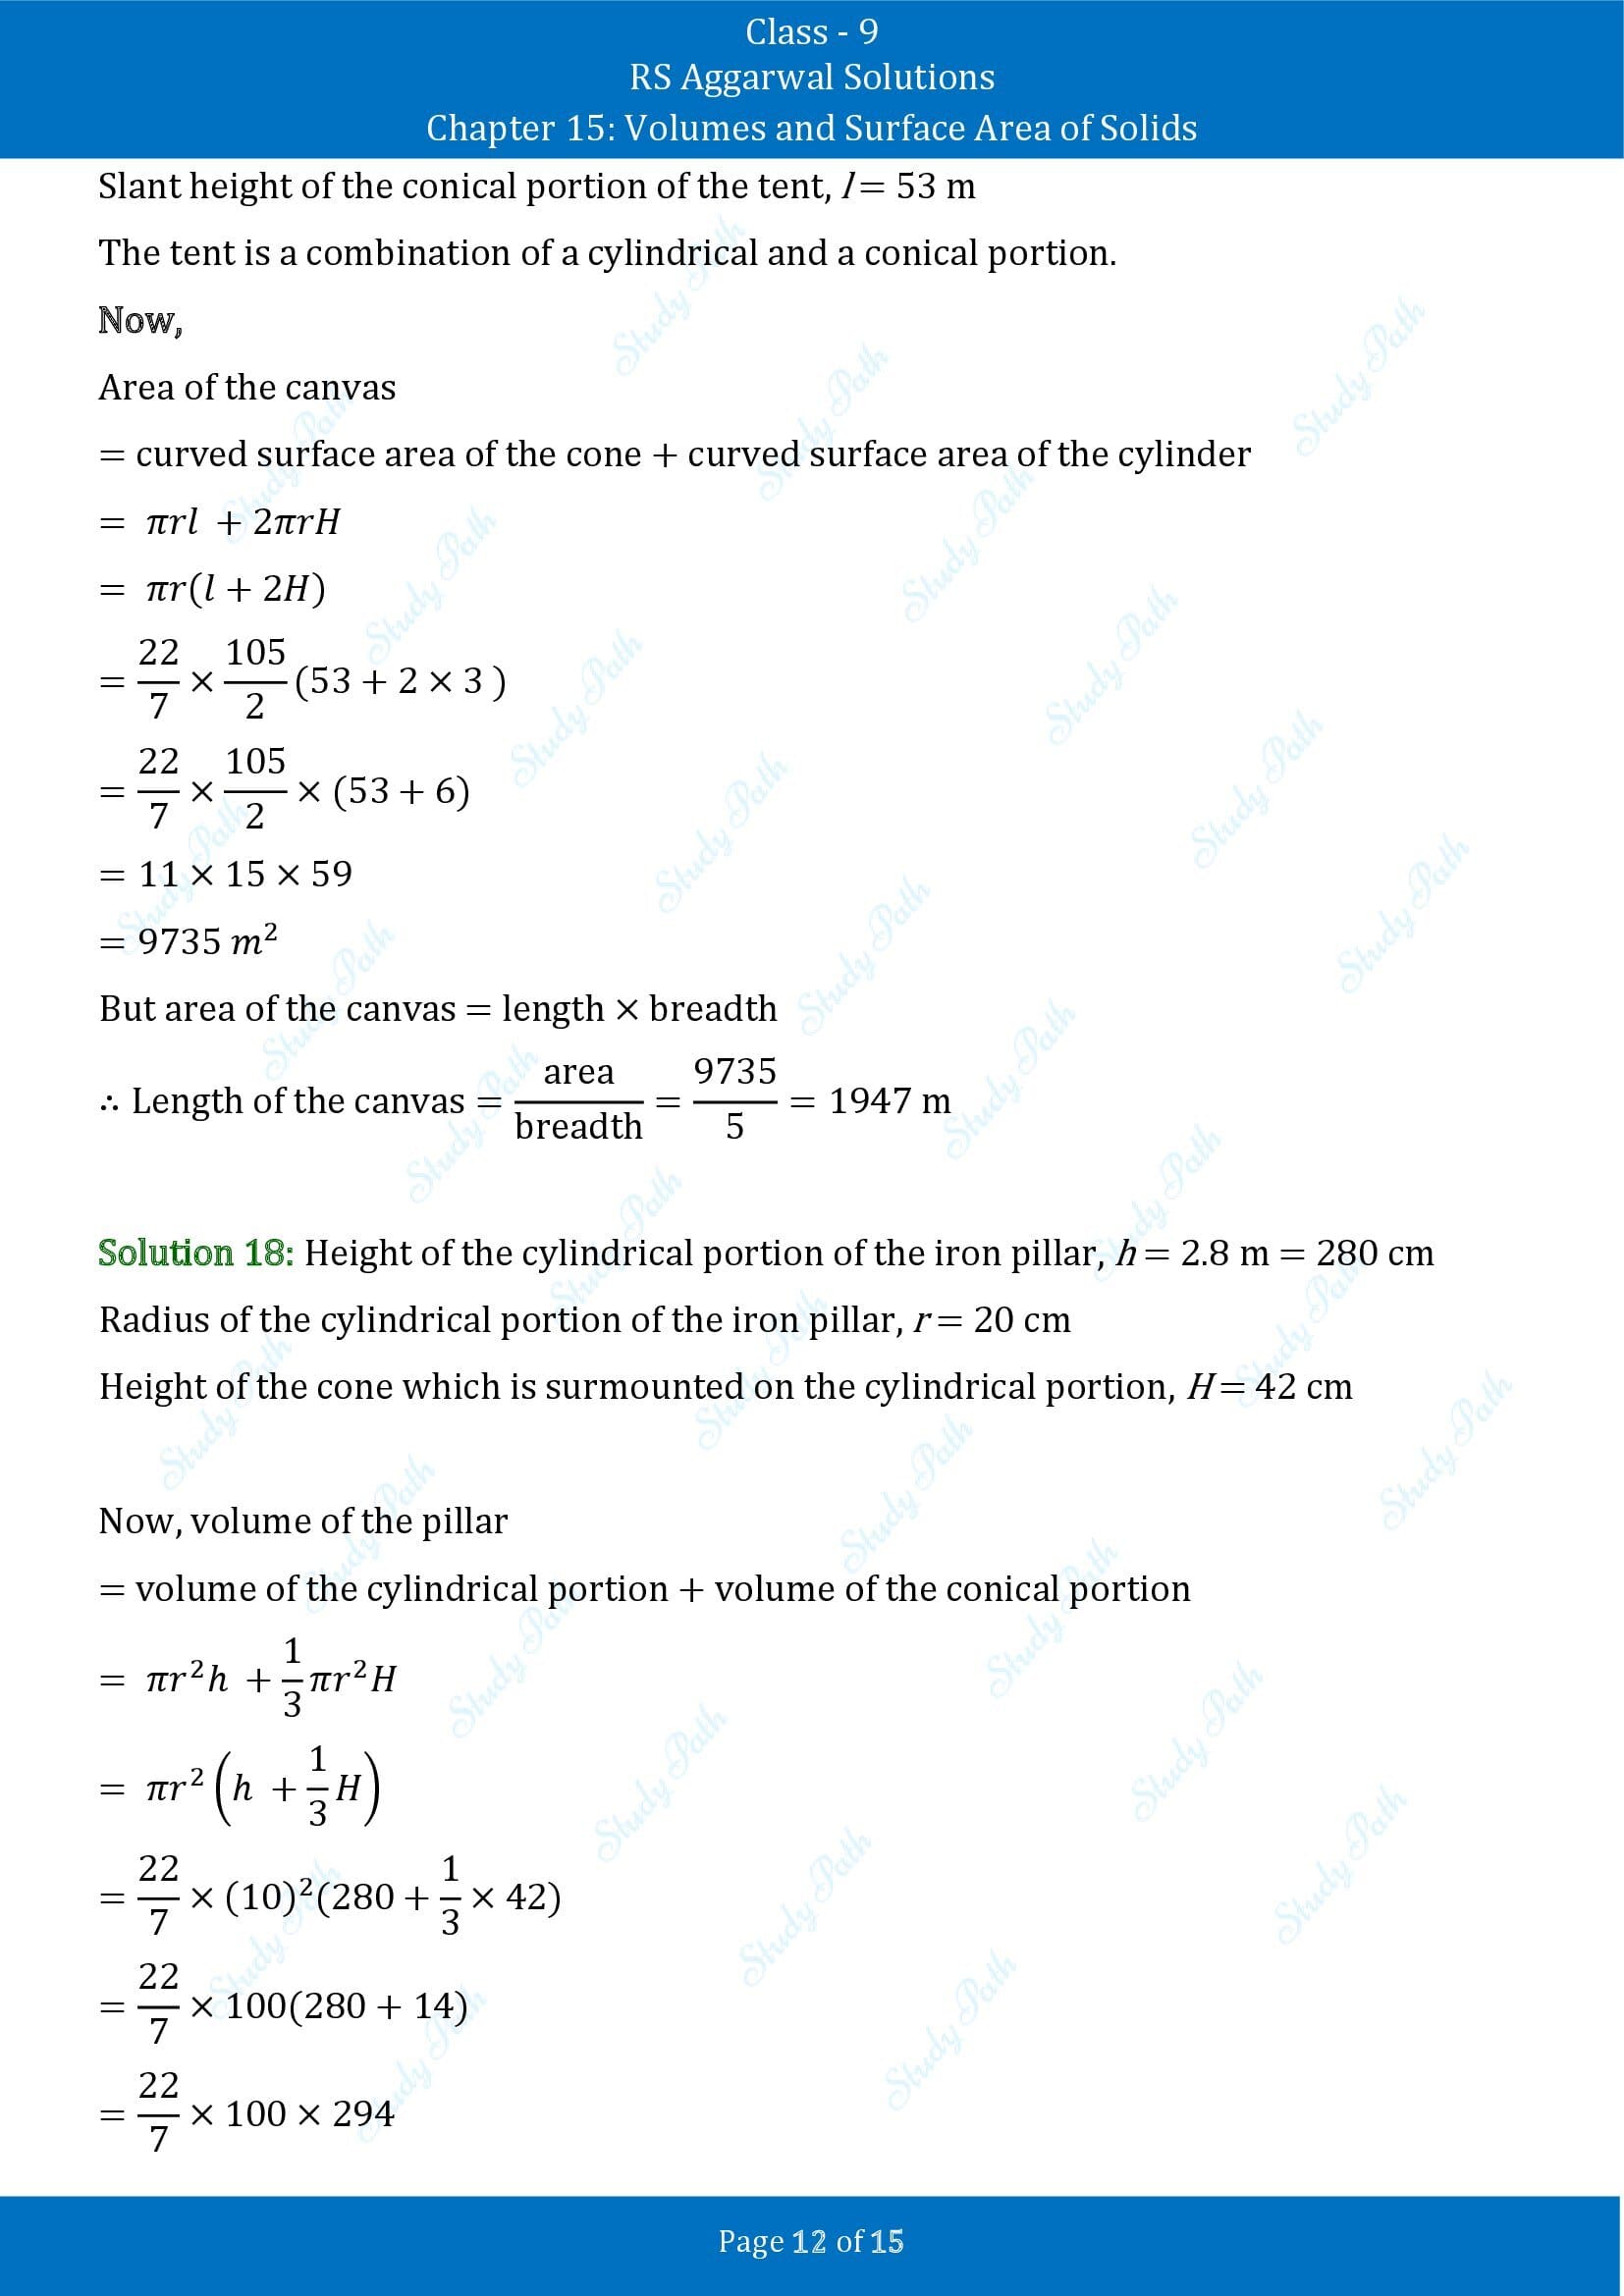 RS Aggarwal Solutions Class 9 Chapter 15 Volumes and Surface Area of Solids Exercise 15C 00012